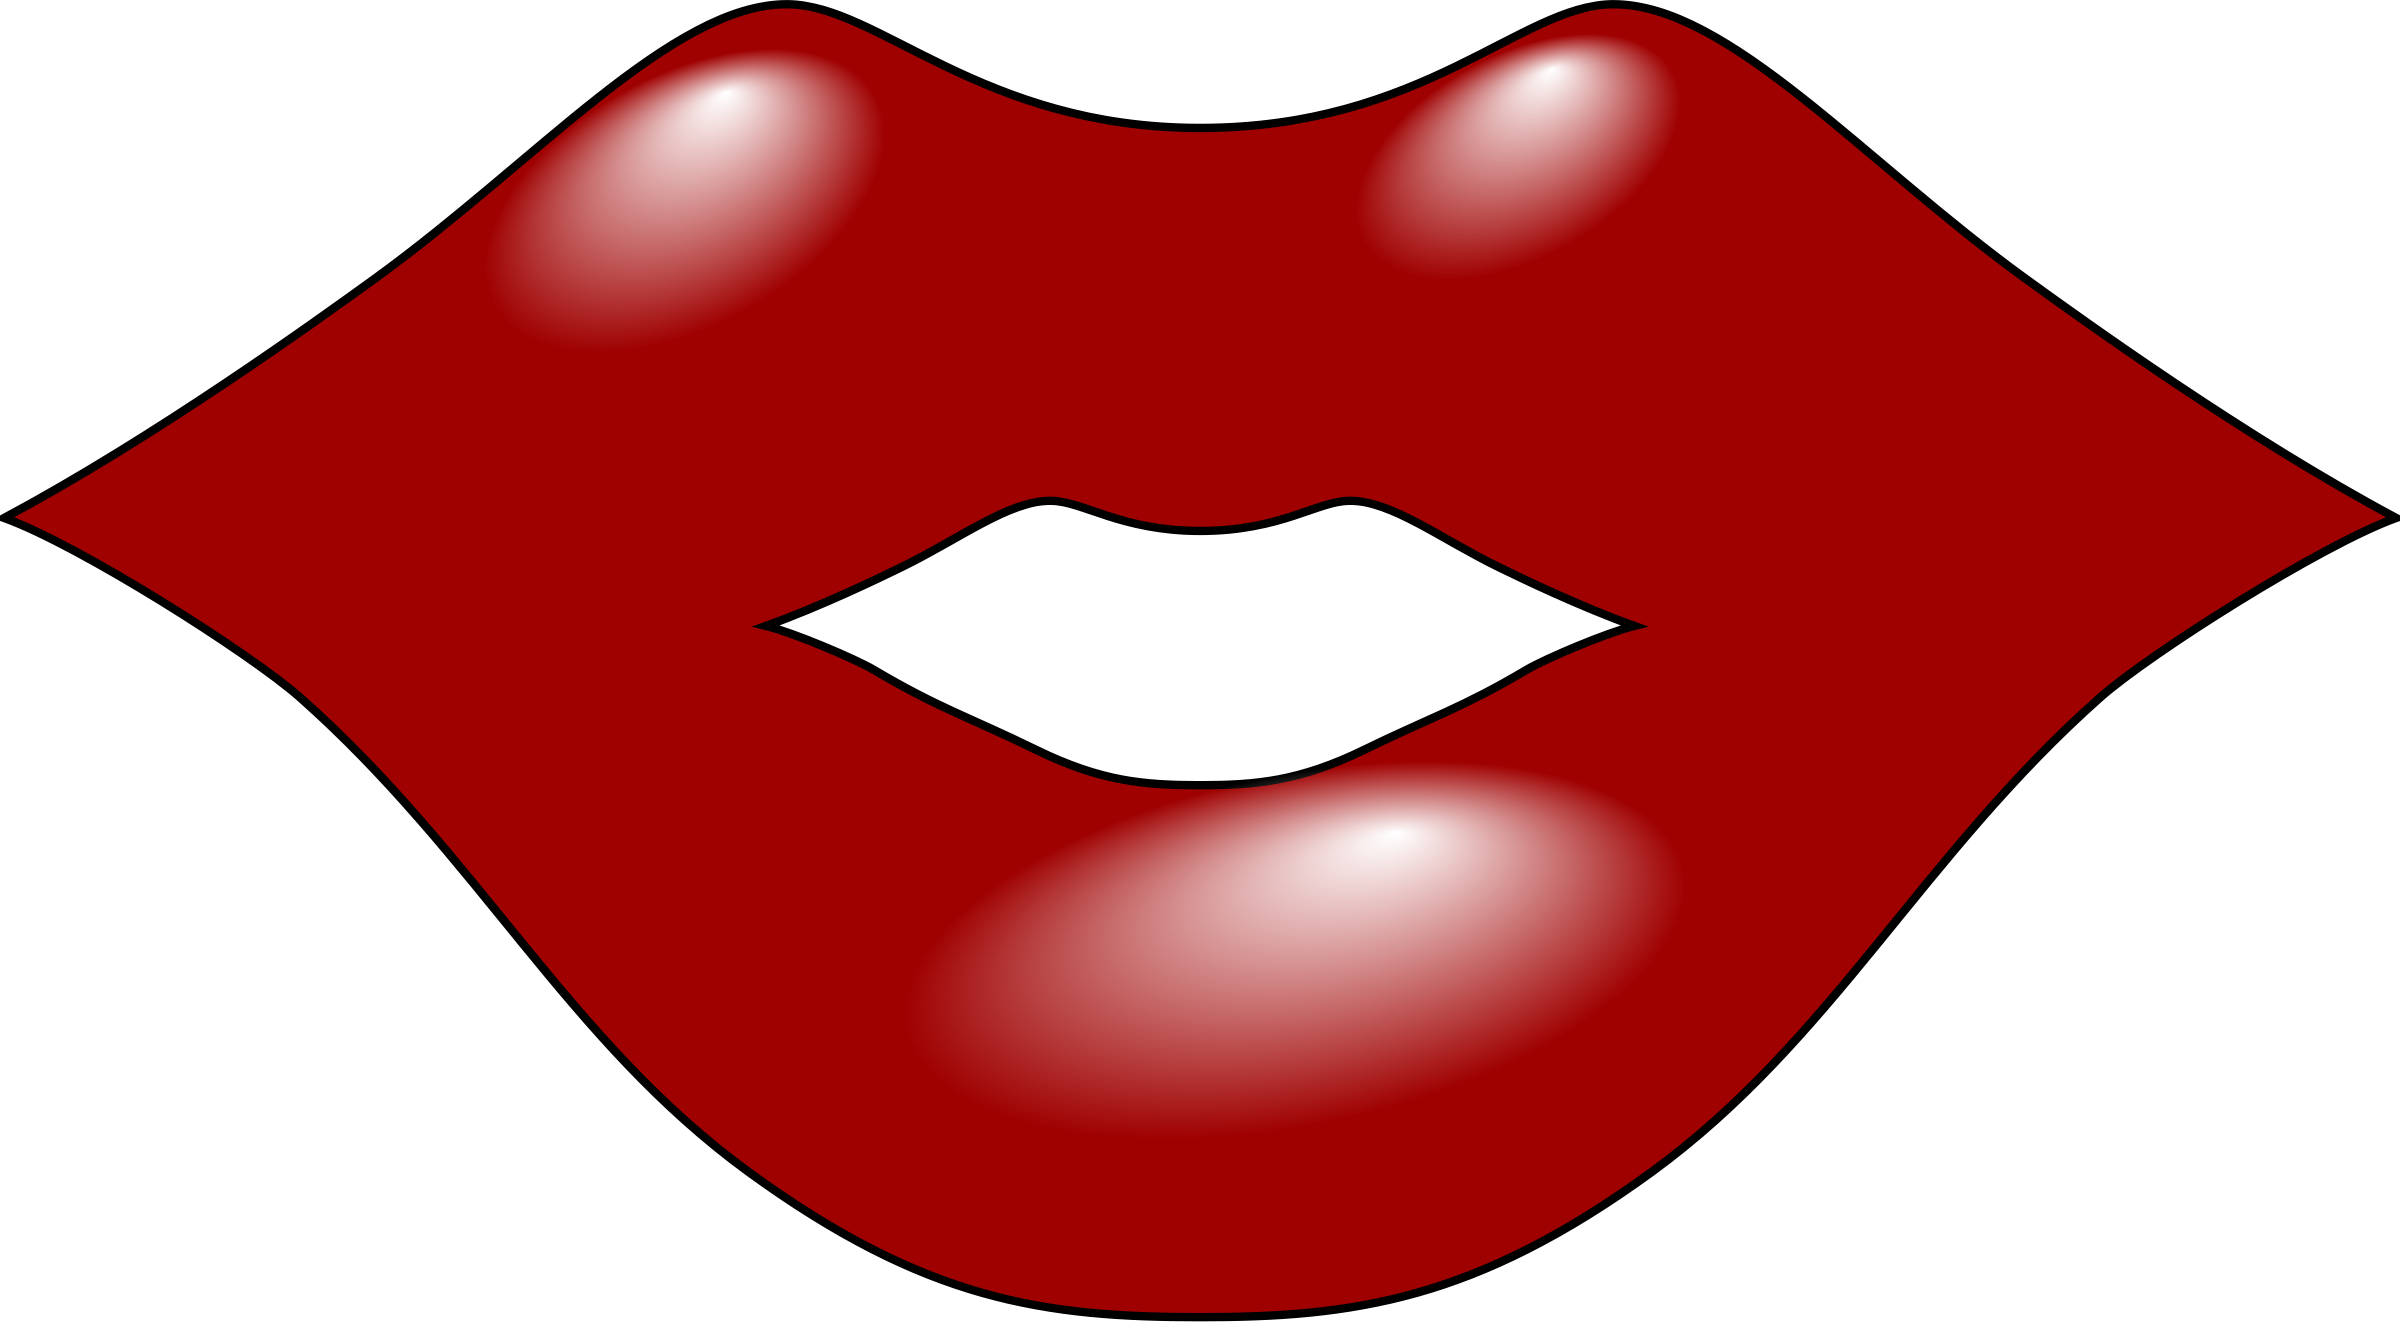 Lips Clip Art | Clipart library - Free Clipart Images